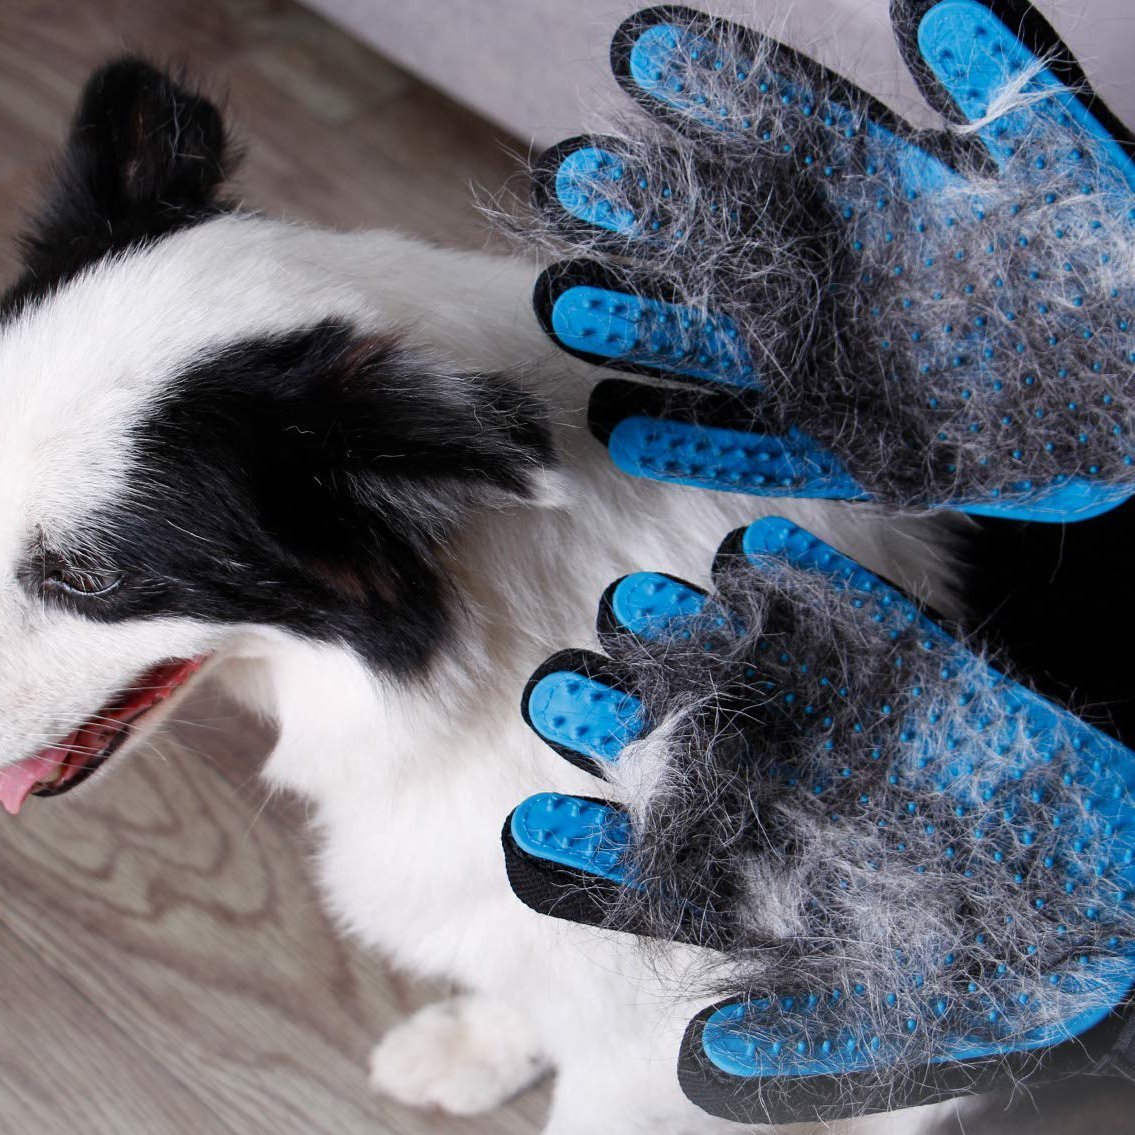 How to use Grooming Gloves Top features of Grooming Gloves